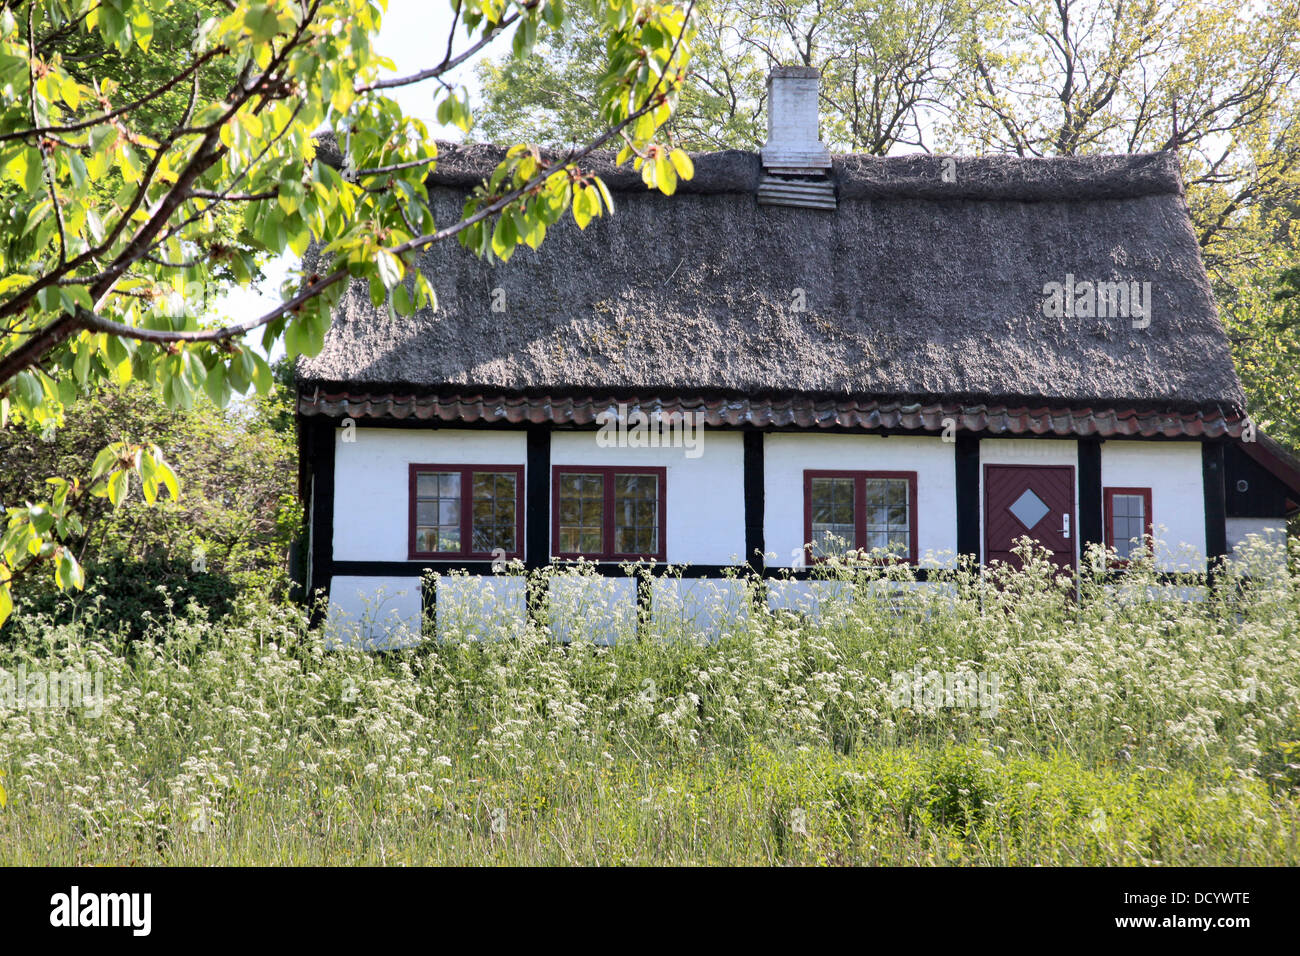 Idyllic country cottage with spring meadow on Bornholm, Denmark Stock Photo